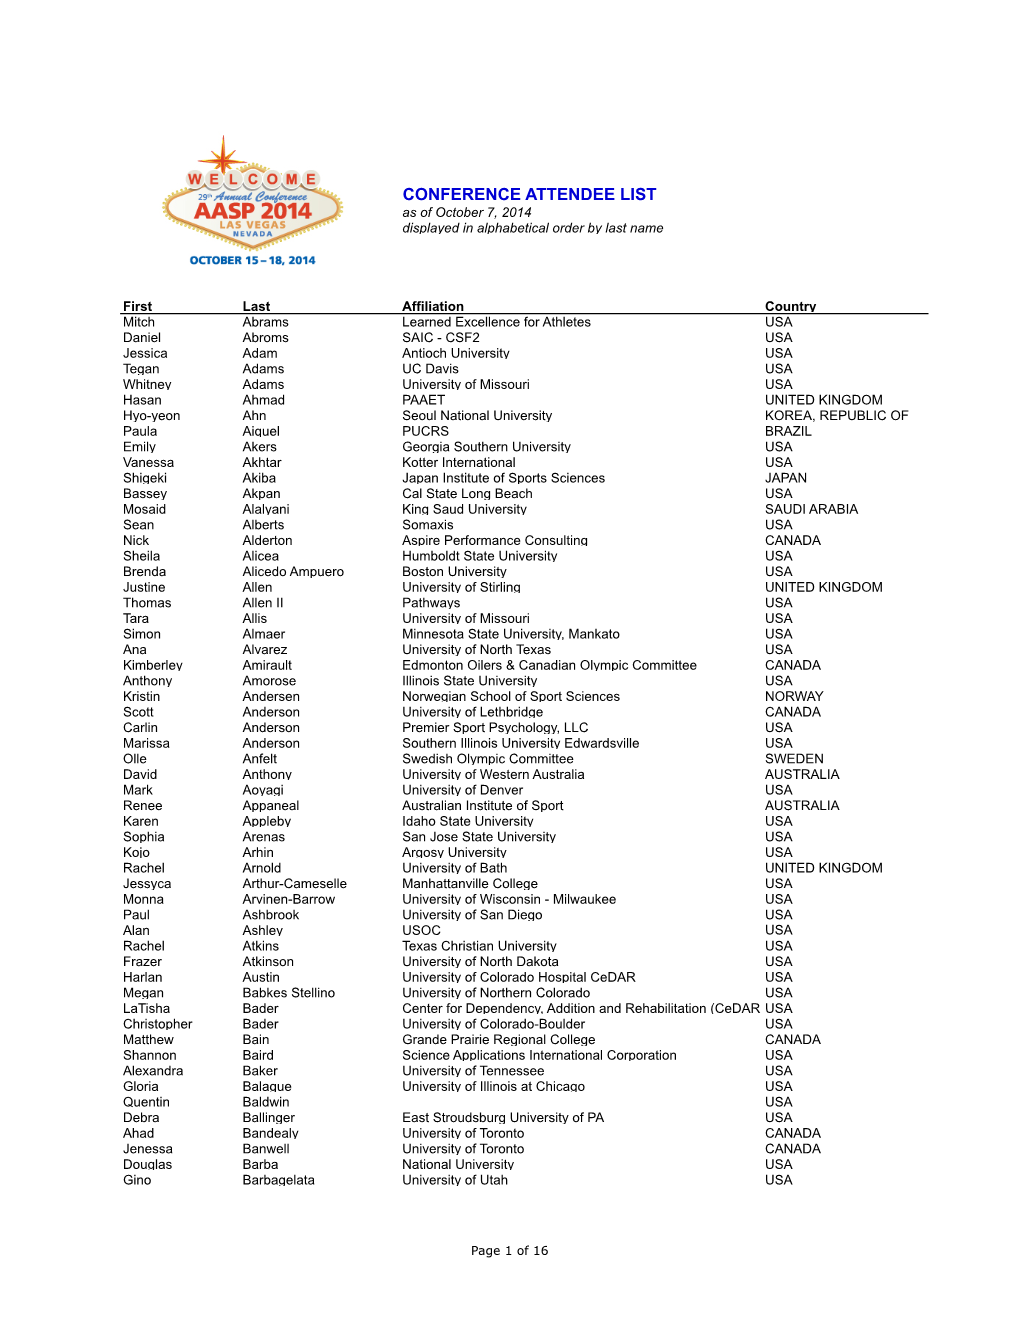 CONFERENCE ATTENDEE LIST As of October 7, 2014 Displayed in Alphabetical Order by Last Name